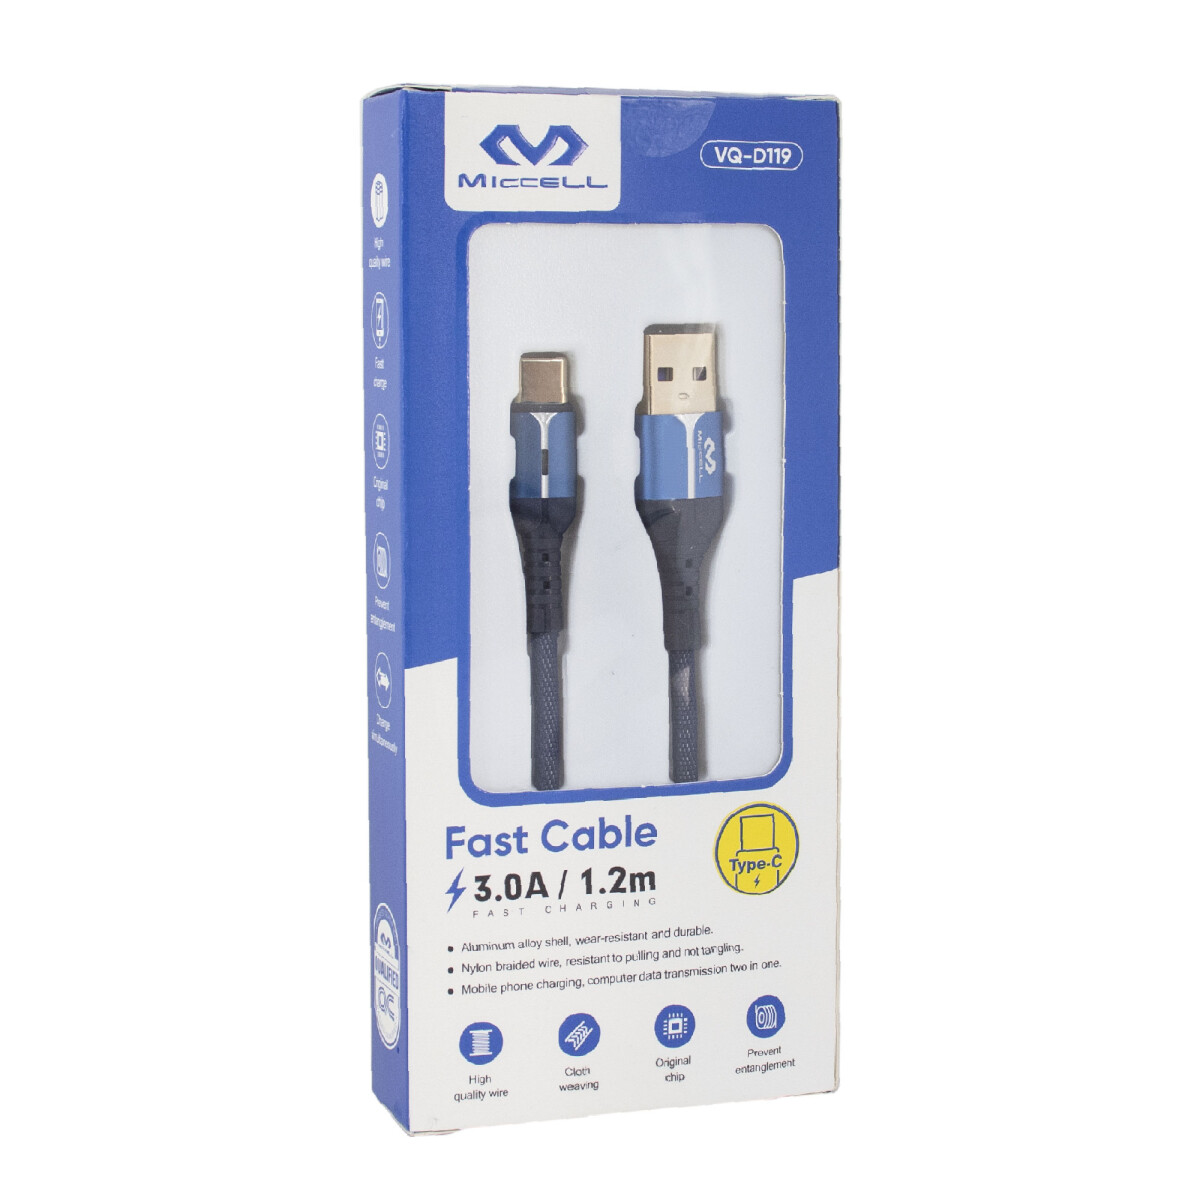 Cable Tipo C Miccell 3a 1.2m Punta Flexible Azul 